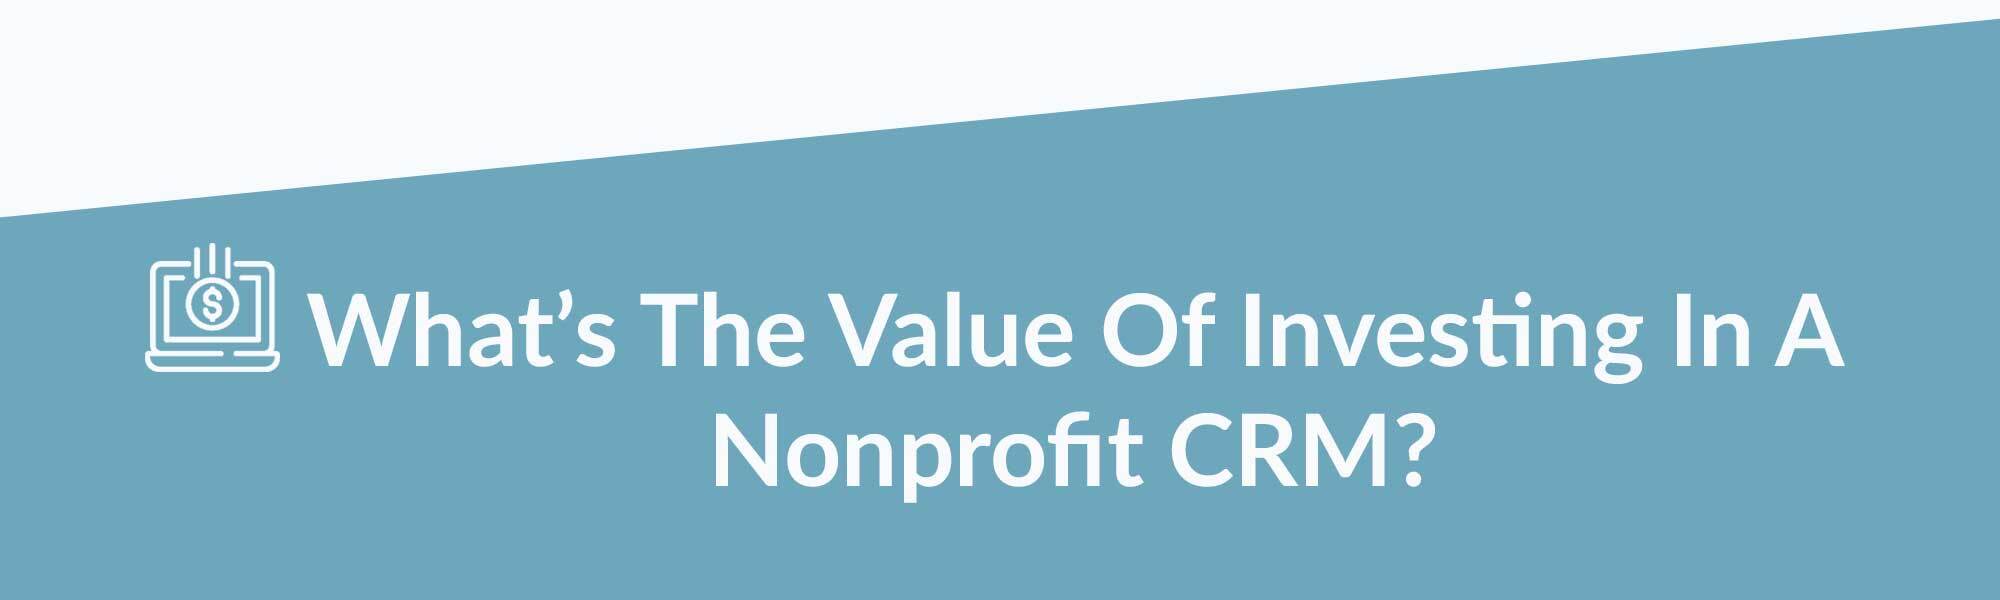 header image for what is the value of nonprofit crm